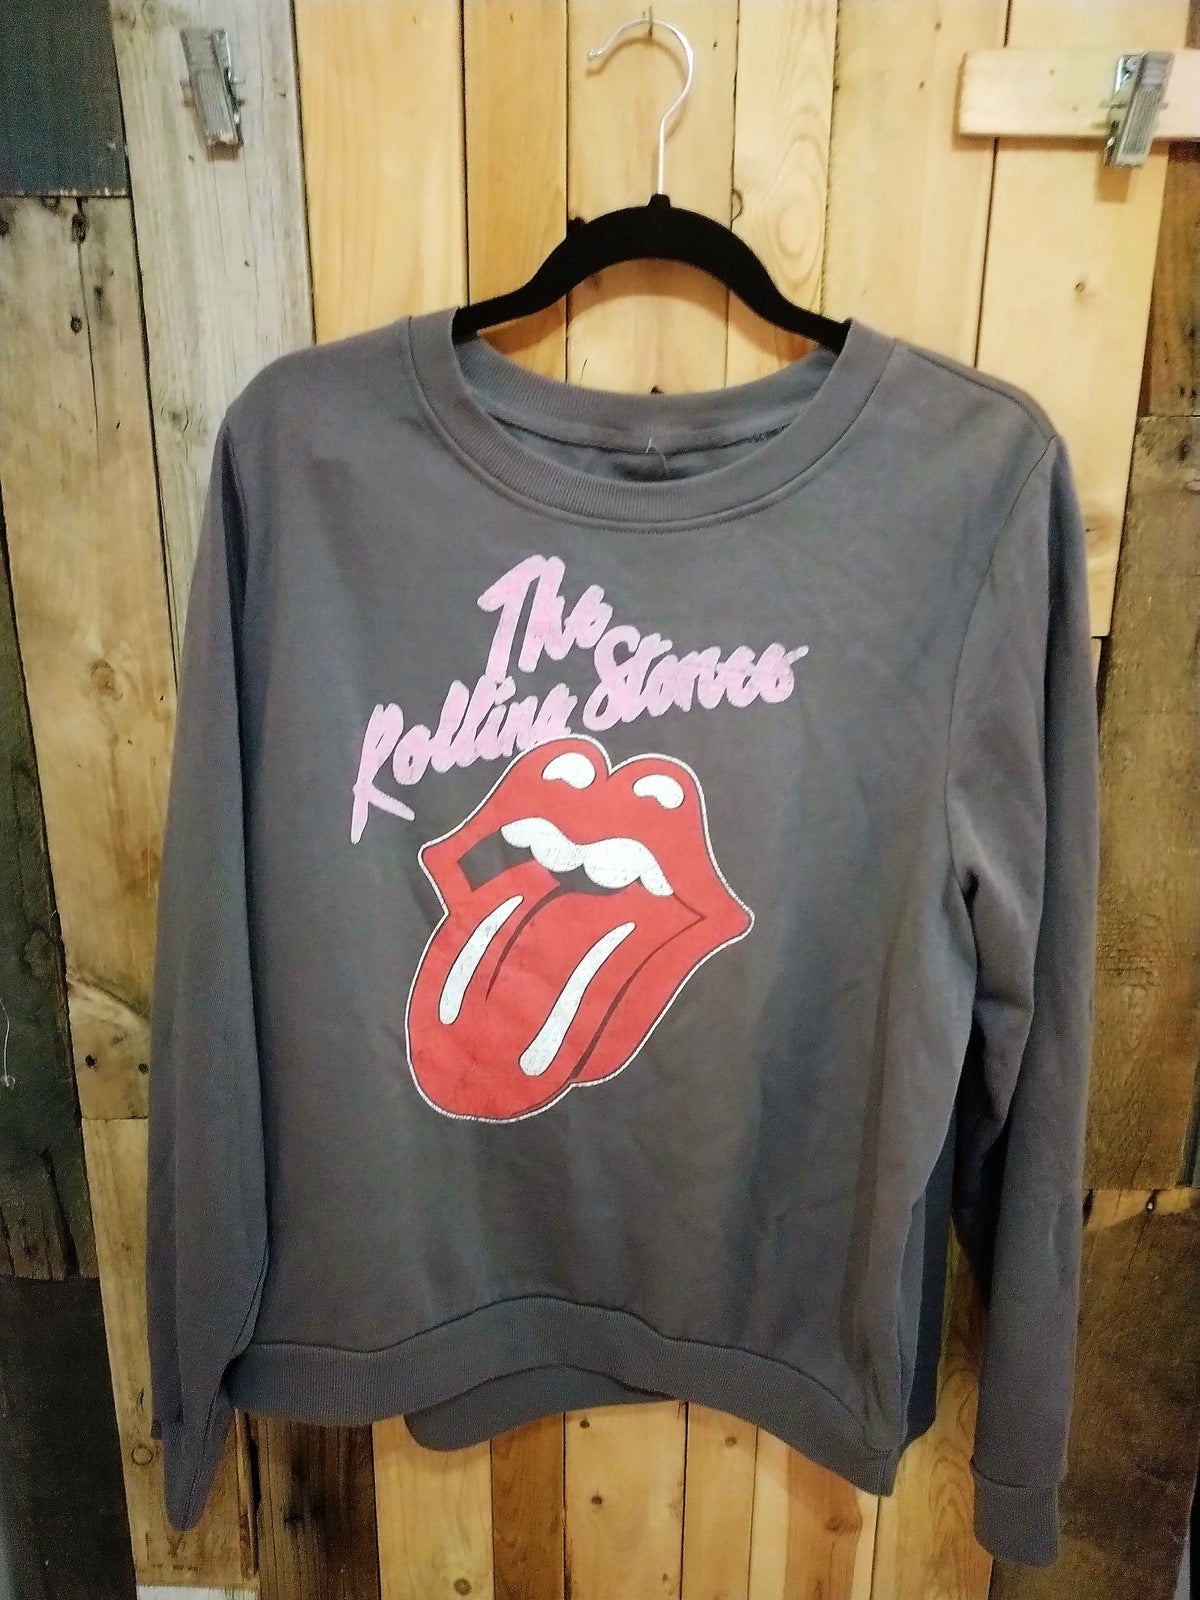 Rolling Stones Sweatshirt Official Merchandise Size XXL New with Tags